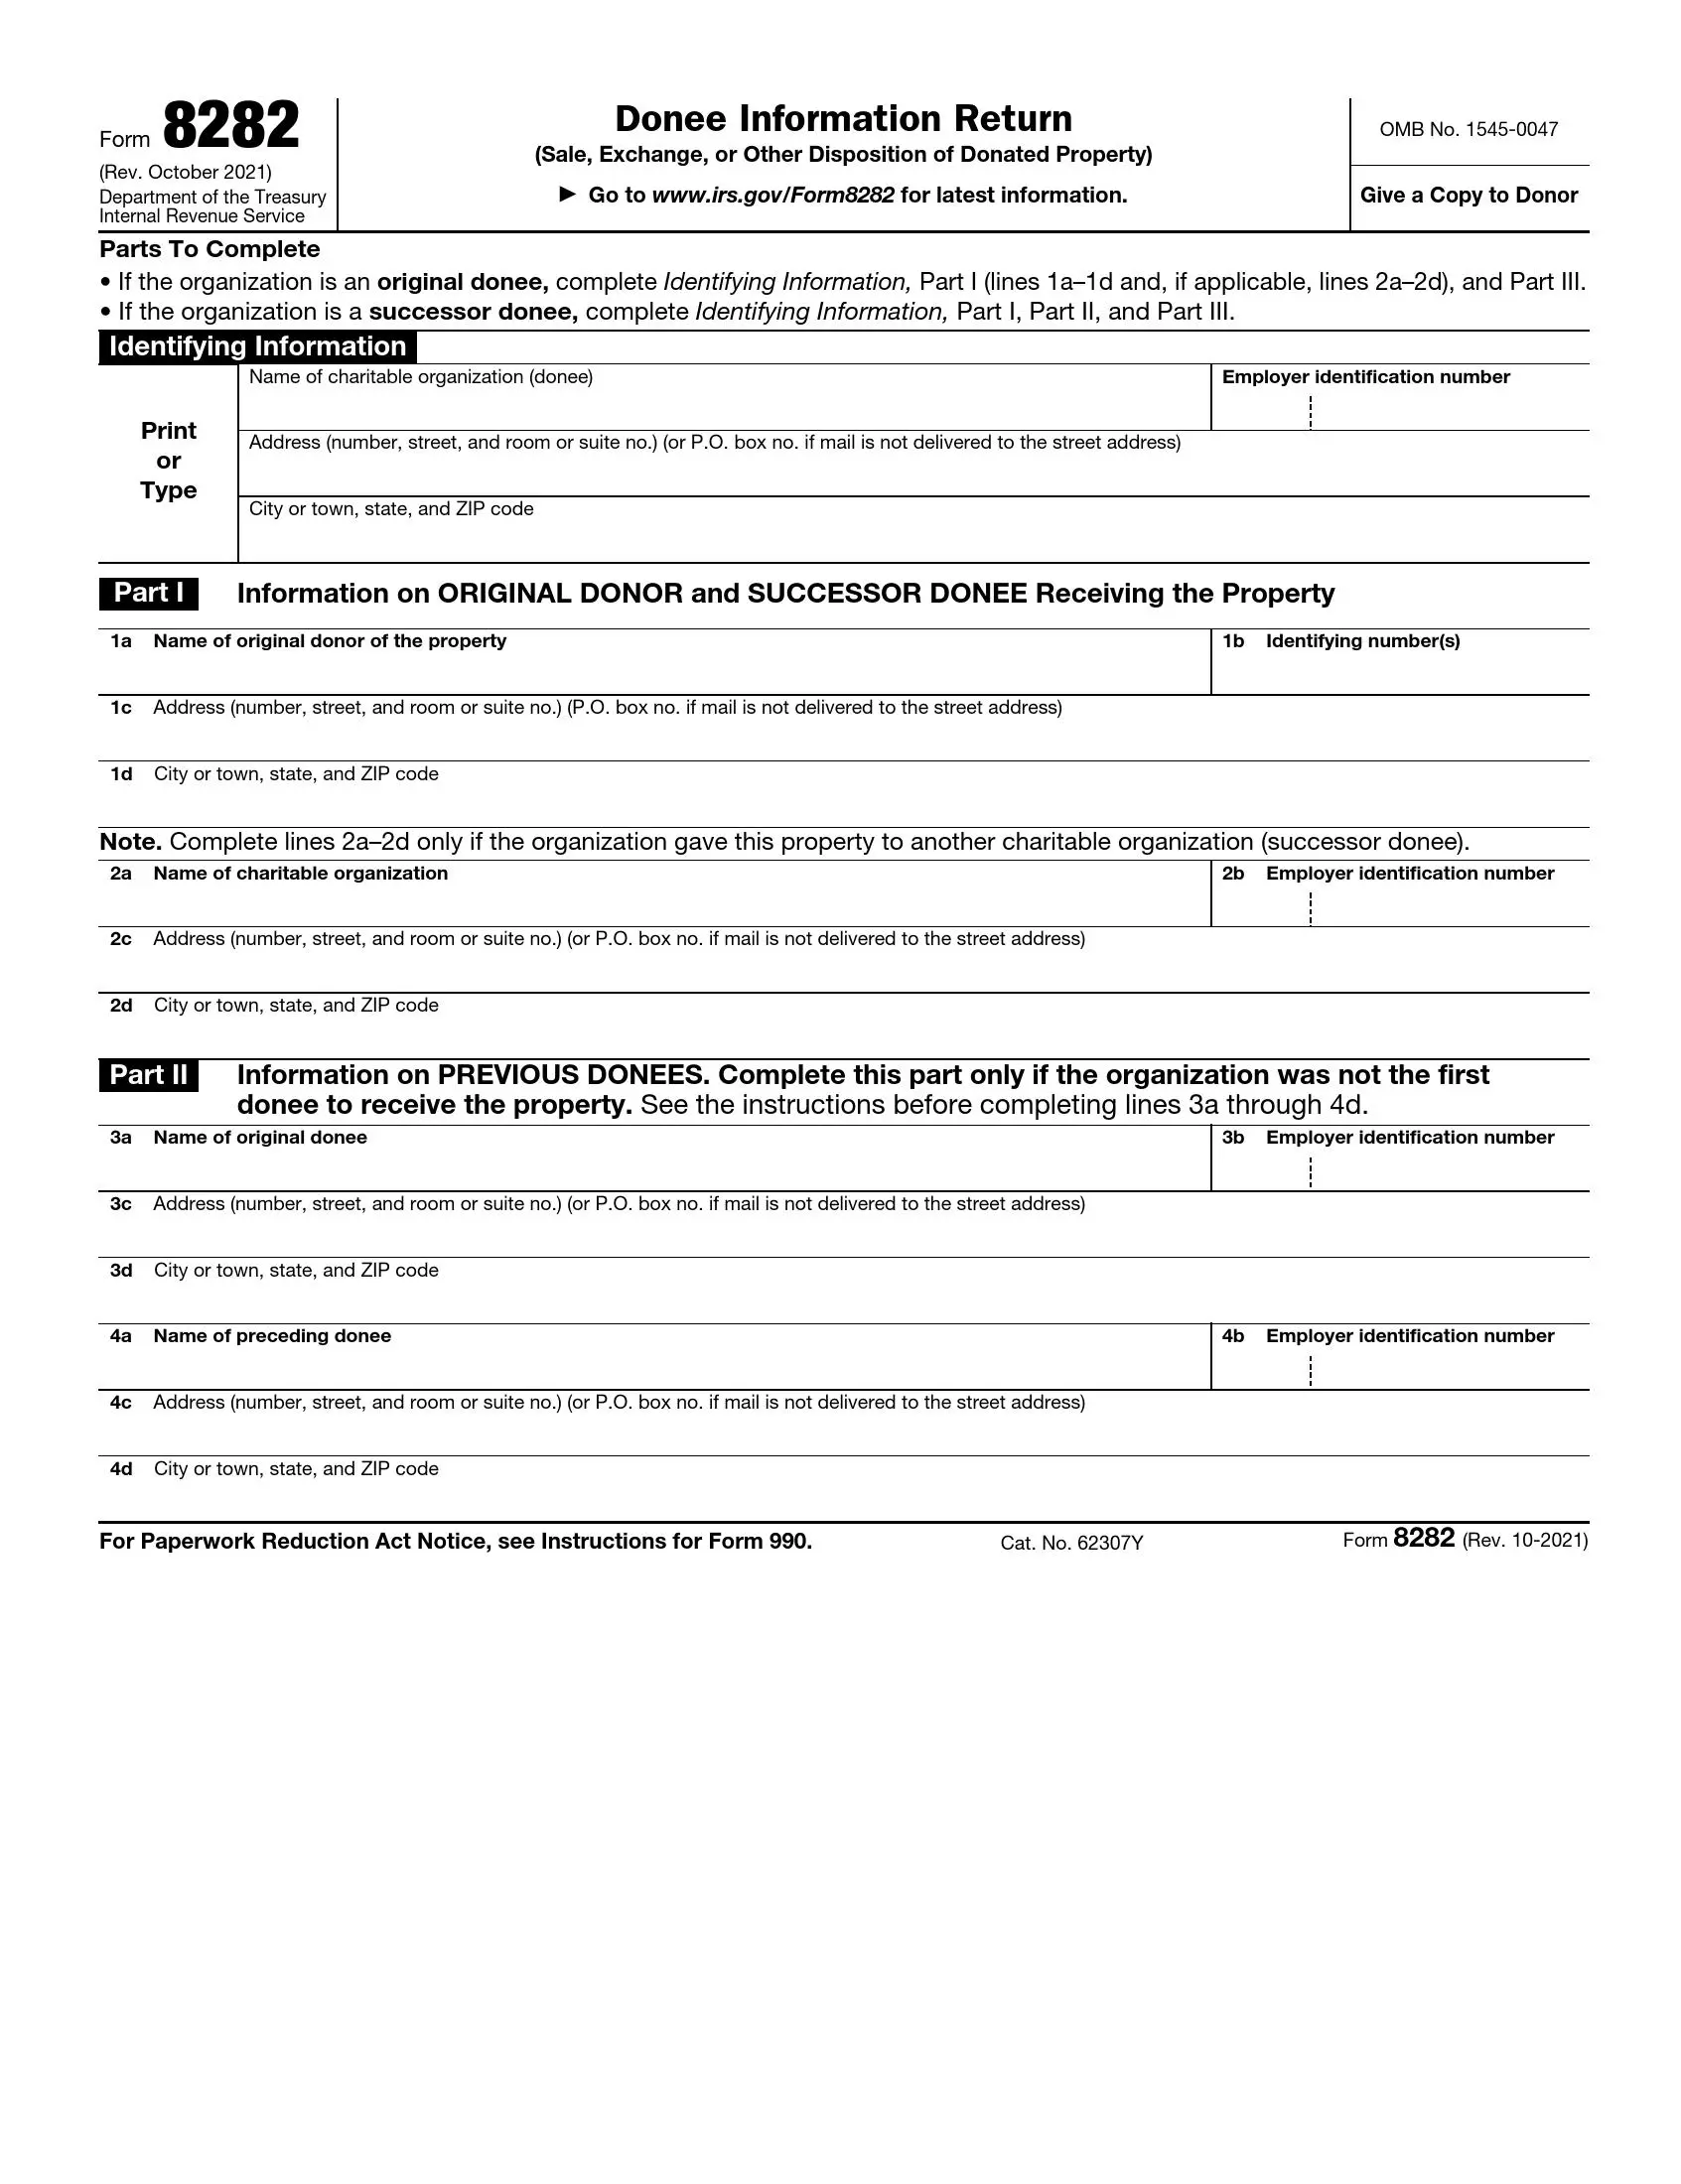 irs form 8282 rev 10 2021 preview